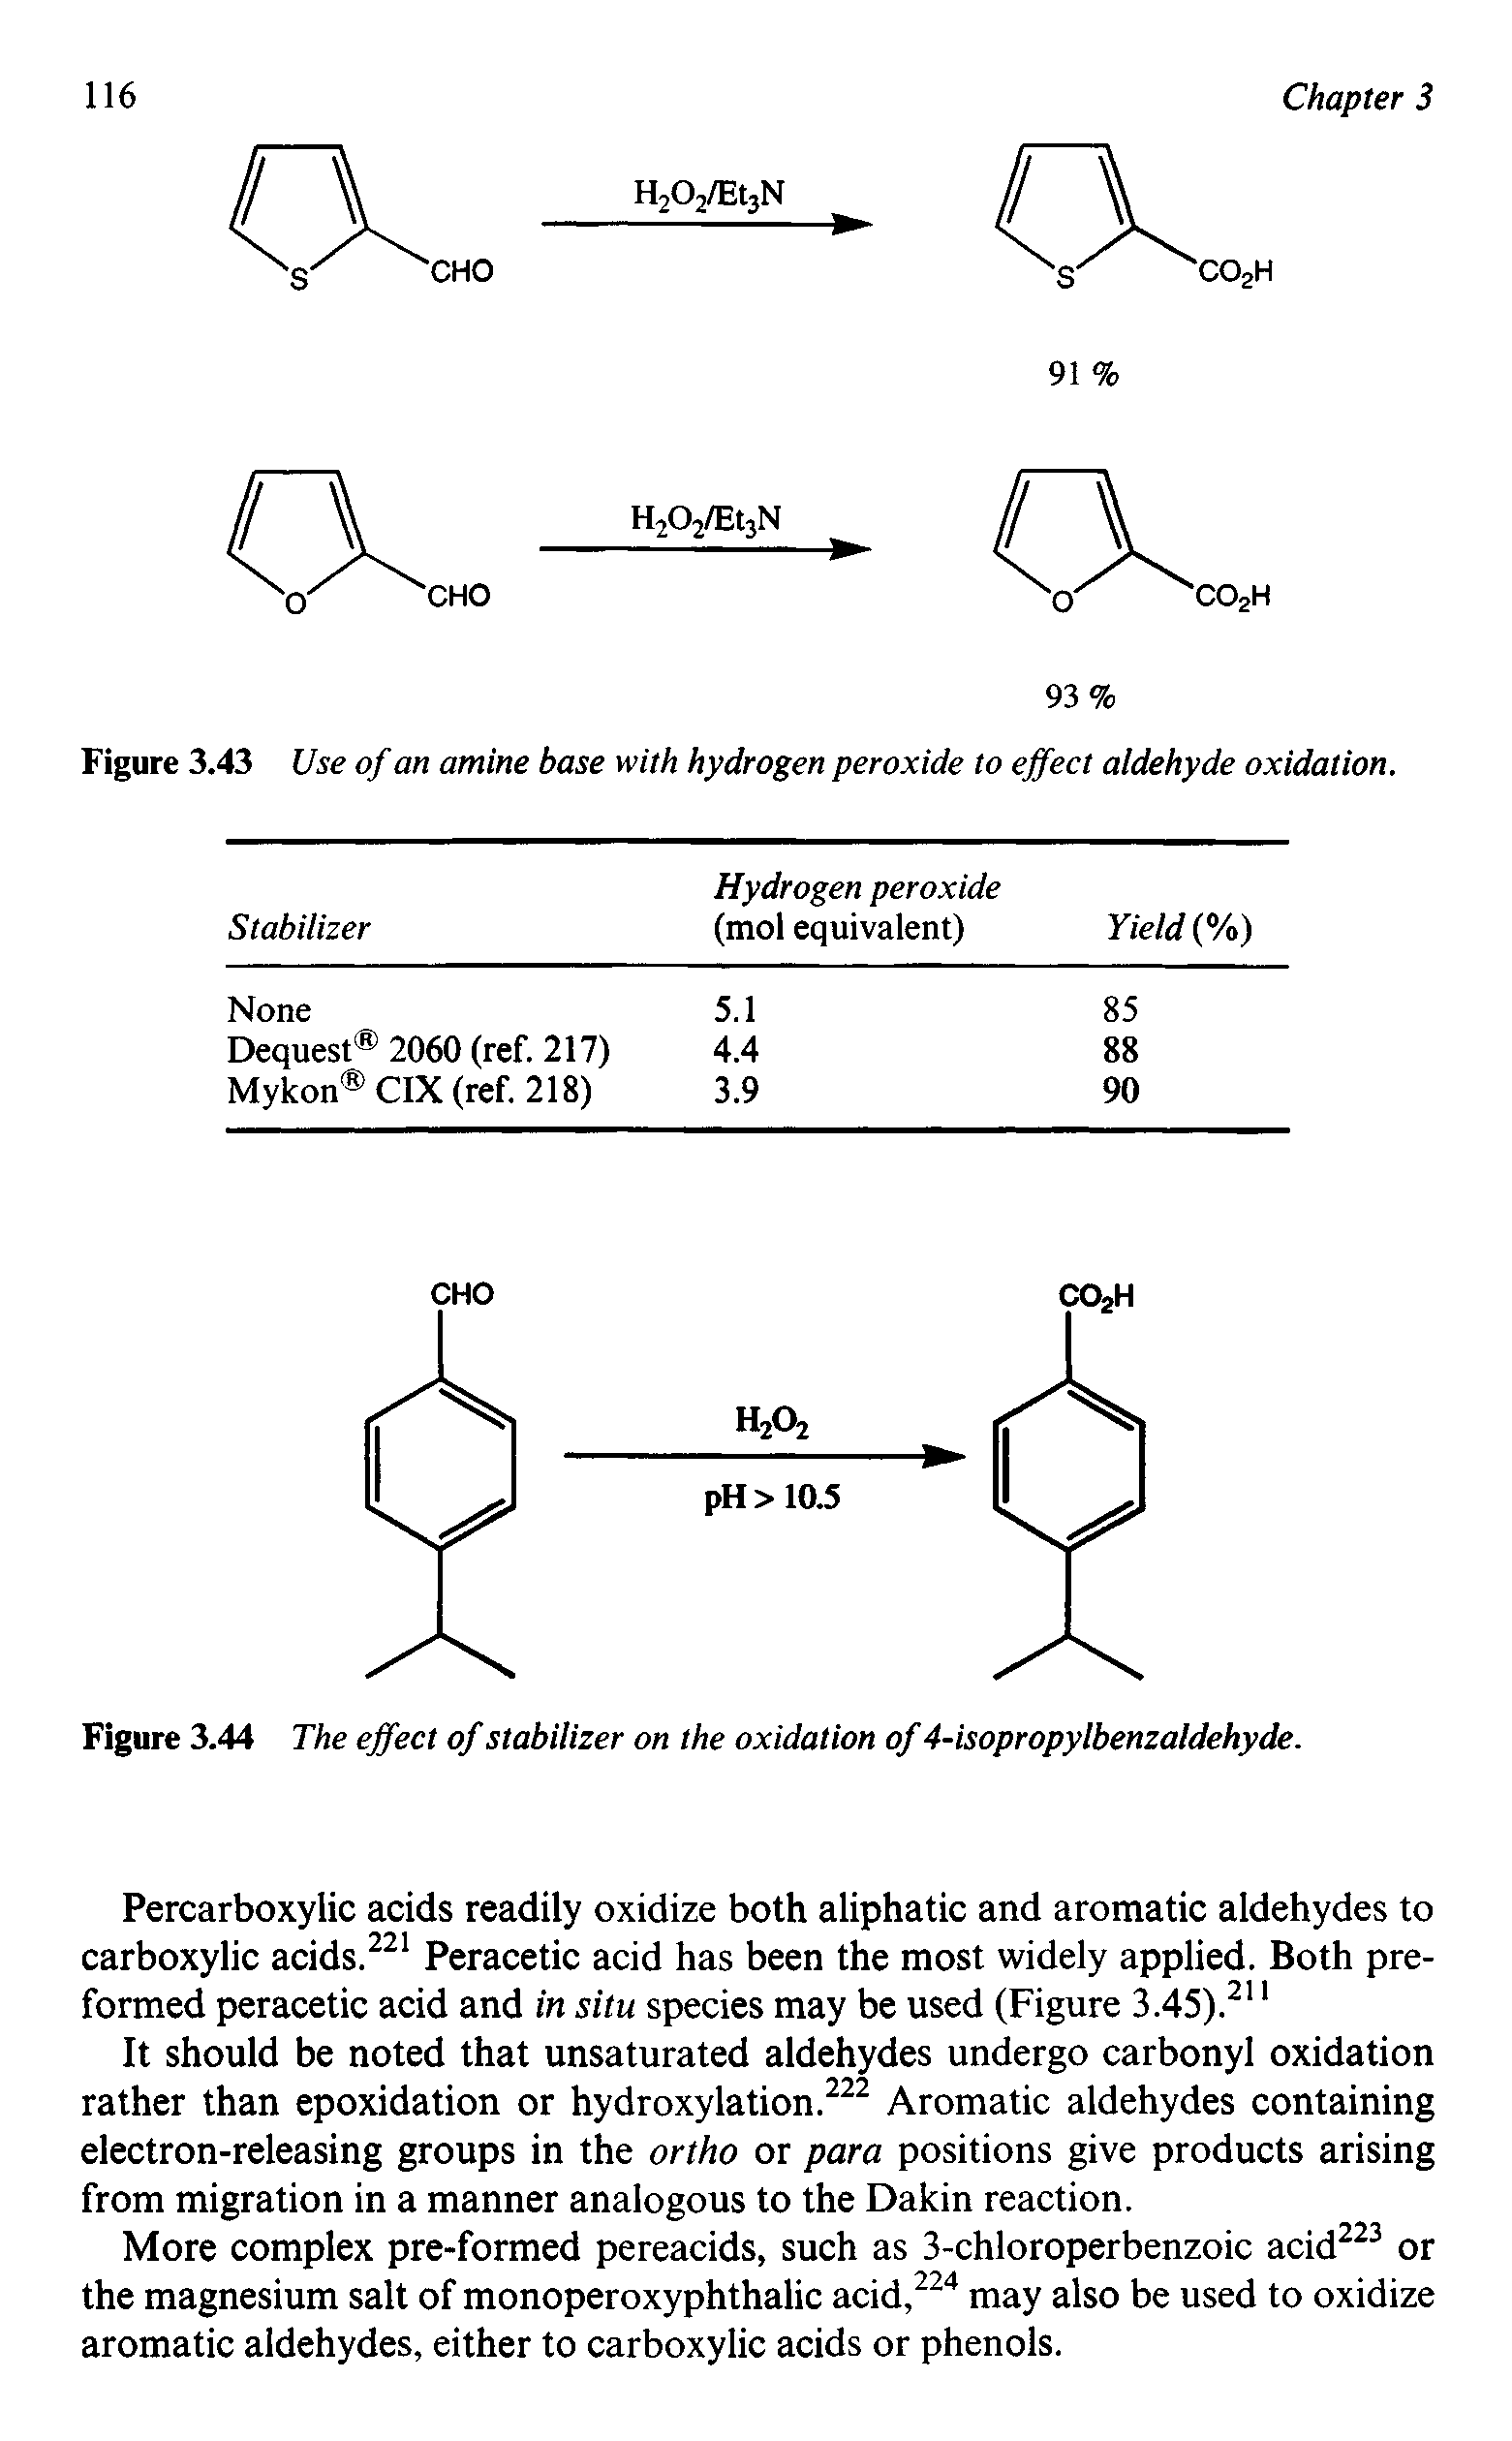 Figure 3.43 Use of an amine base with hydrogen peroxide to effect aldehyde oxidation.